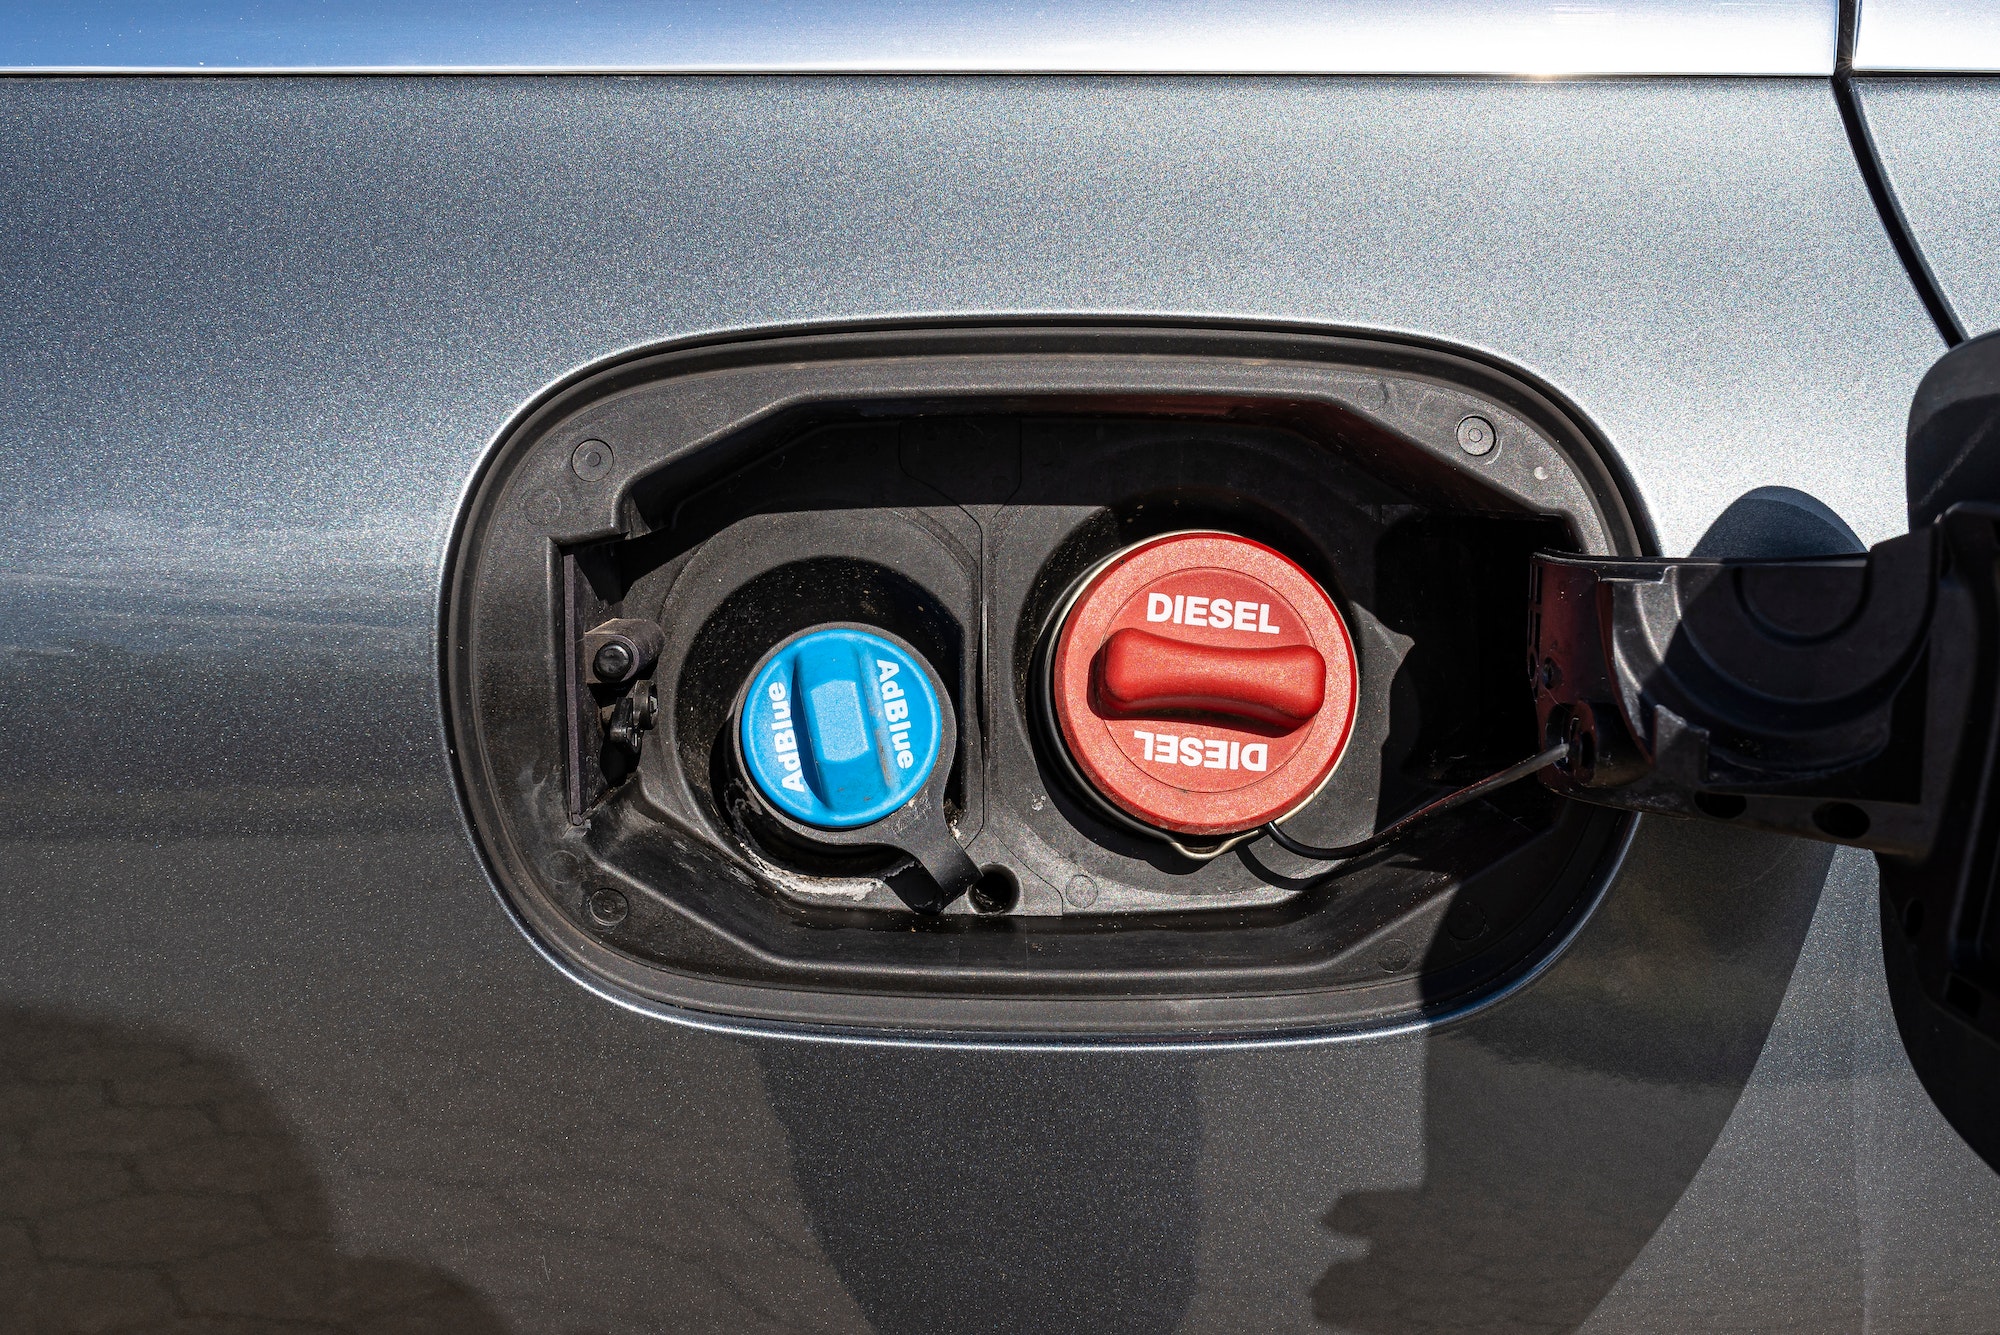 https://www.muchoneumatico.com/blog/wp-content/uploads/2023/02/fuel-filler-flap-open-with-red-diesel-cap-and-blue-adblue-the-fuel-filler-caps-are-closed-.jpg